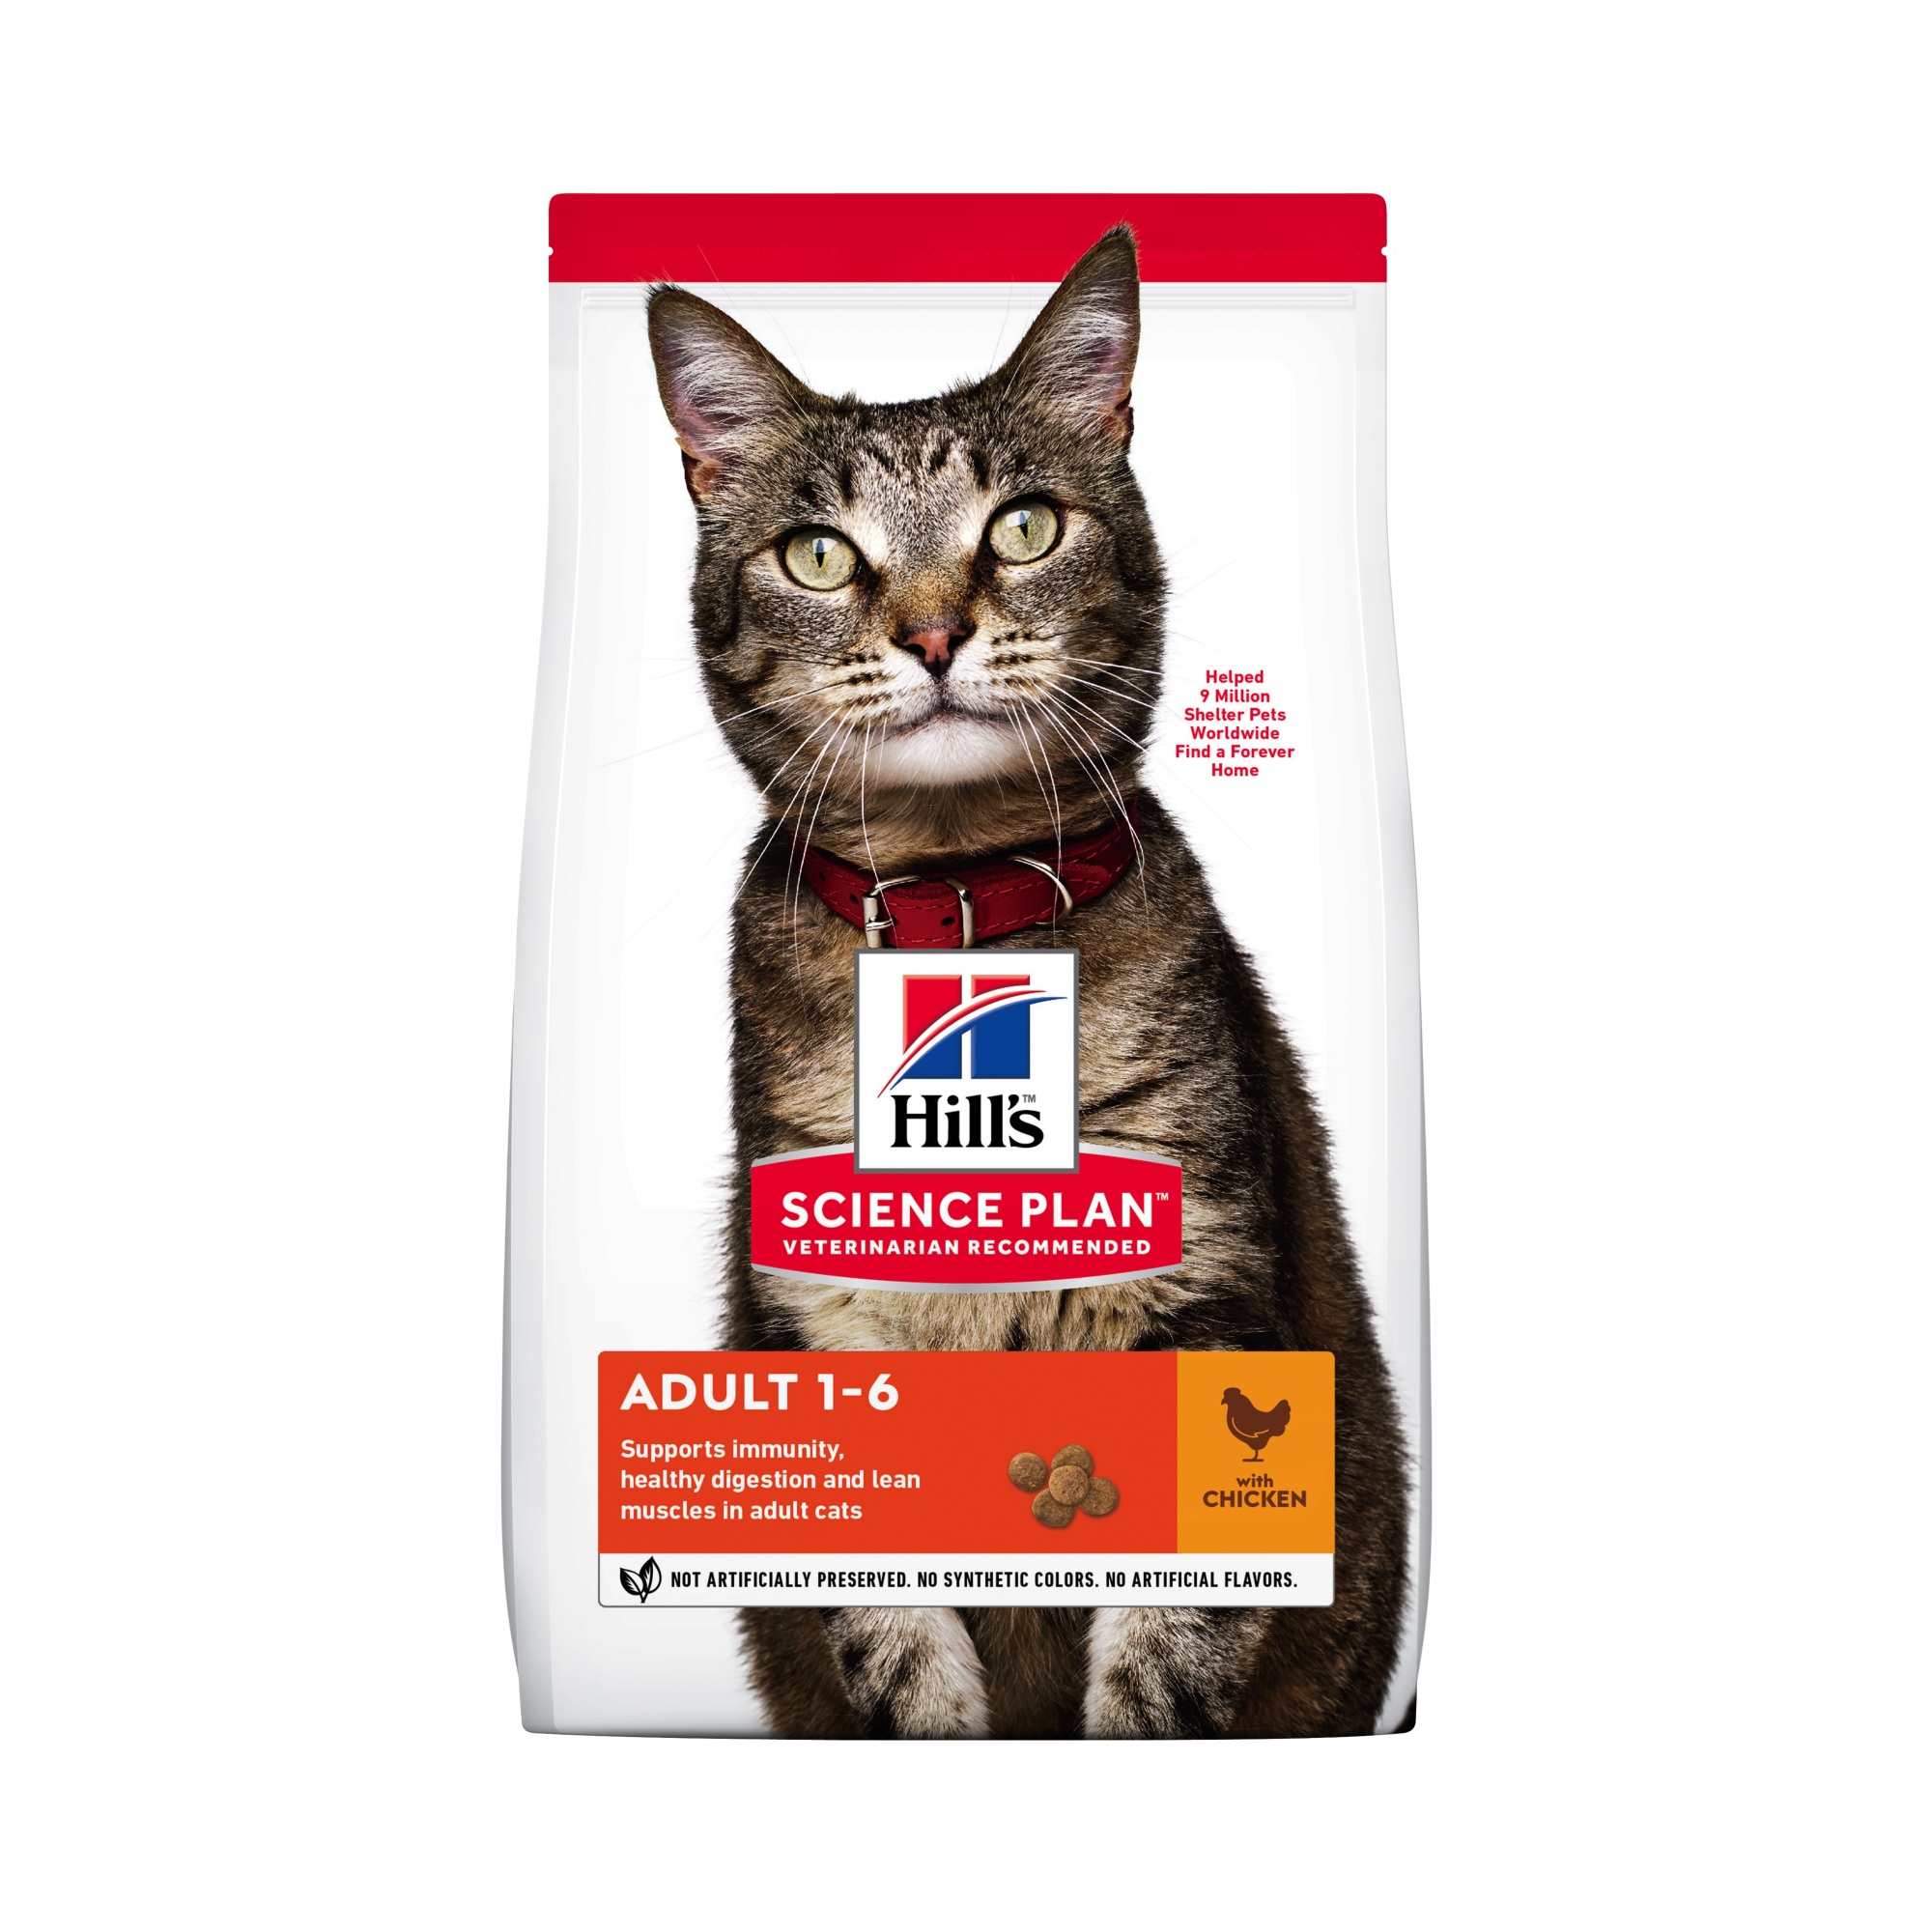 Buy Hill's Cat Adult Chicken for your dog or cat | Tinybuddy